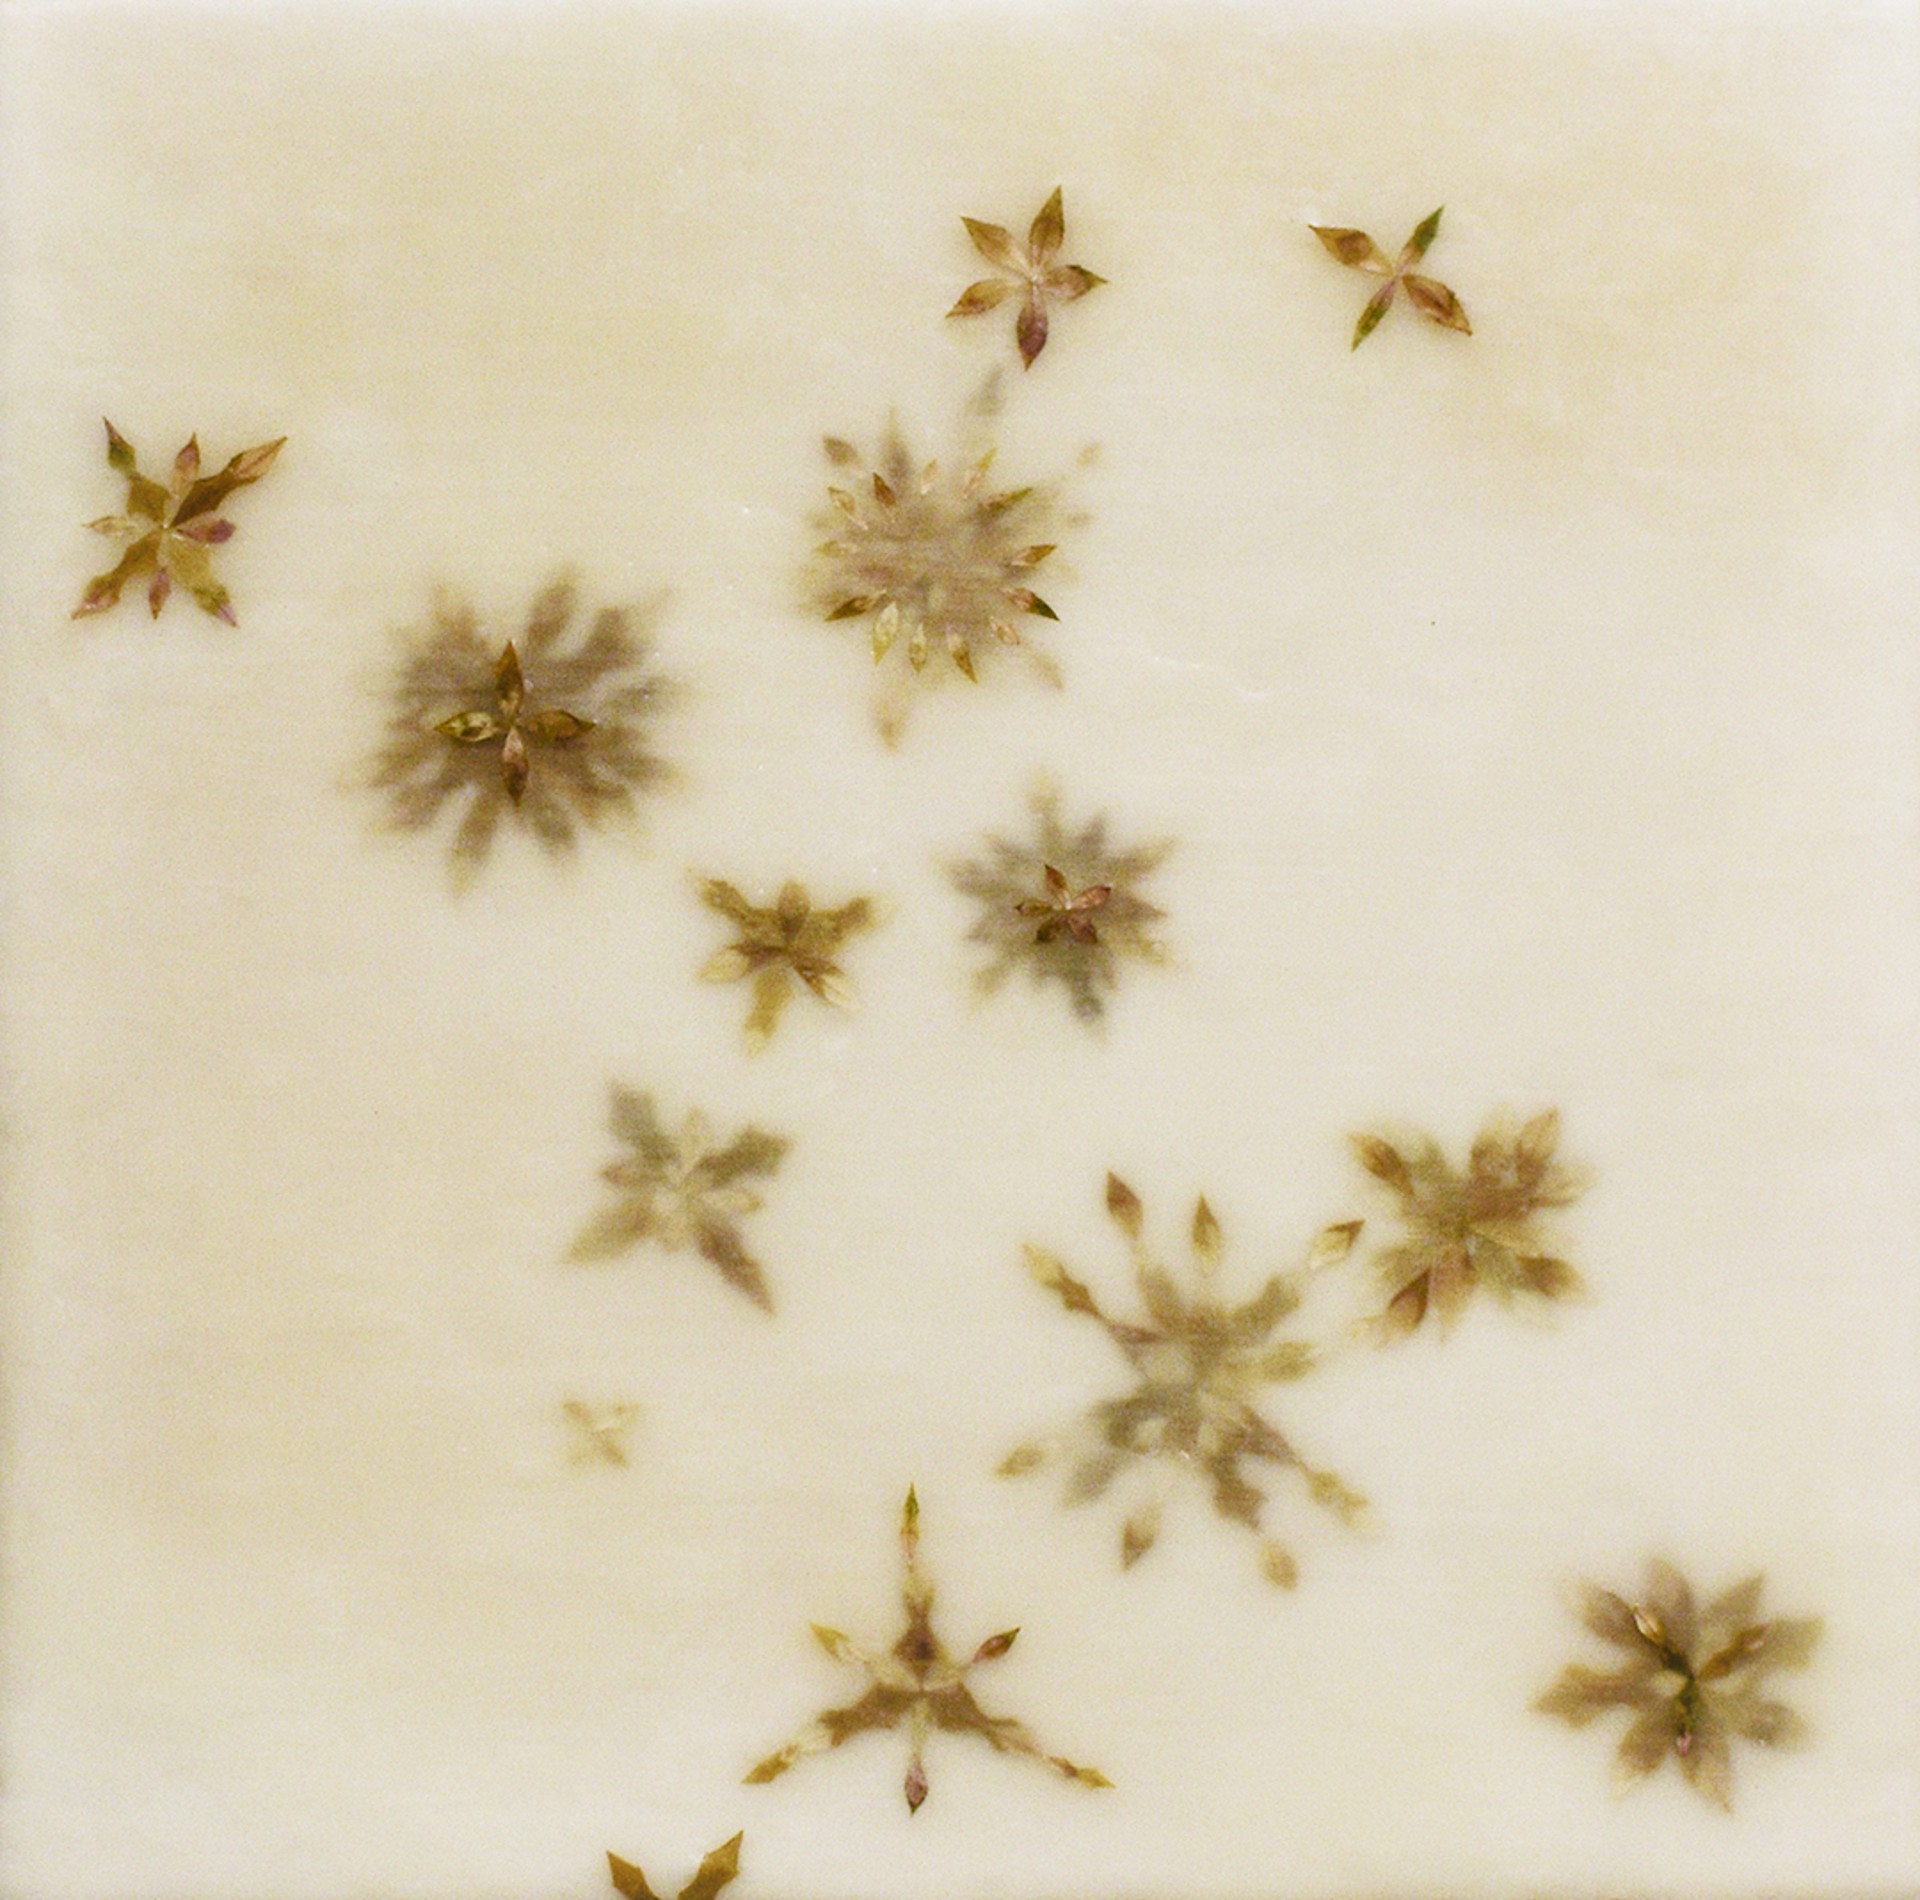 Snowflowers 8 by Allyson Levy